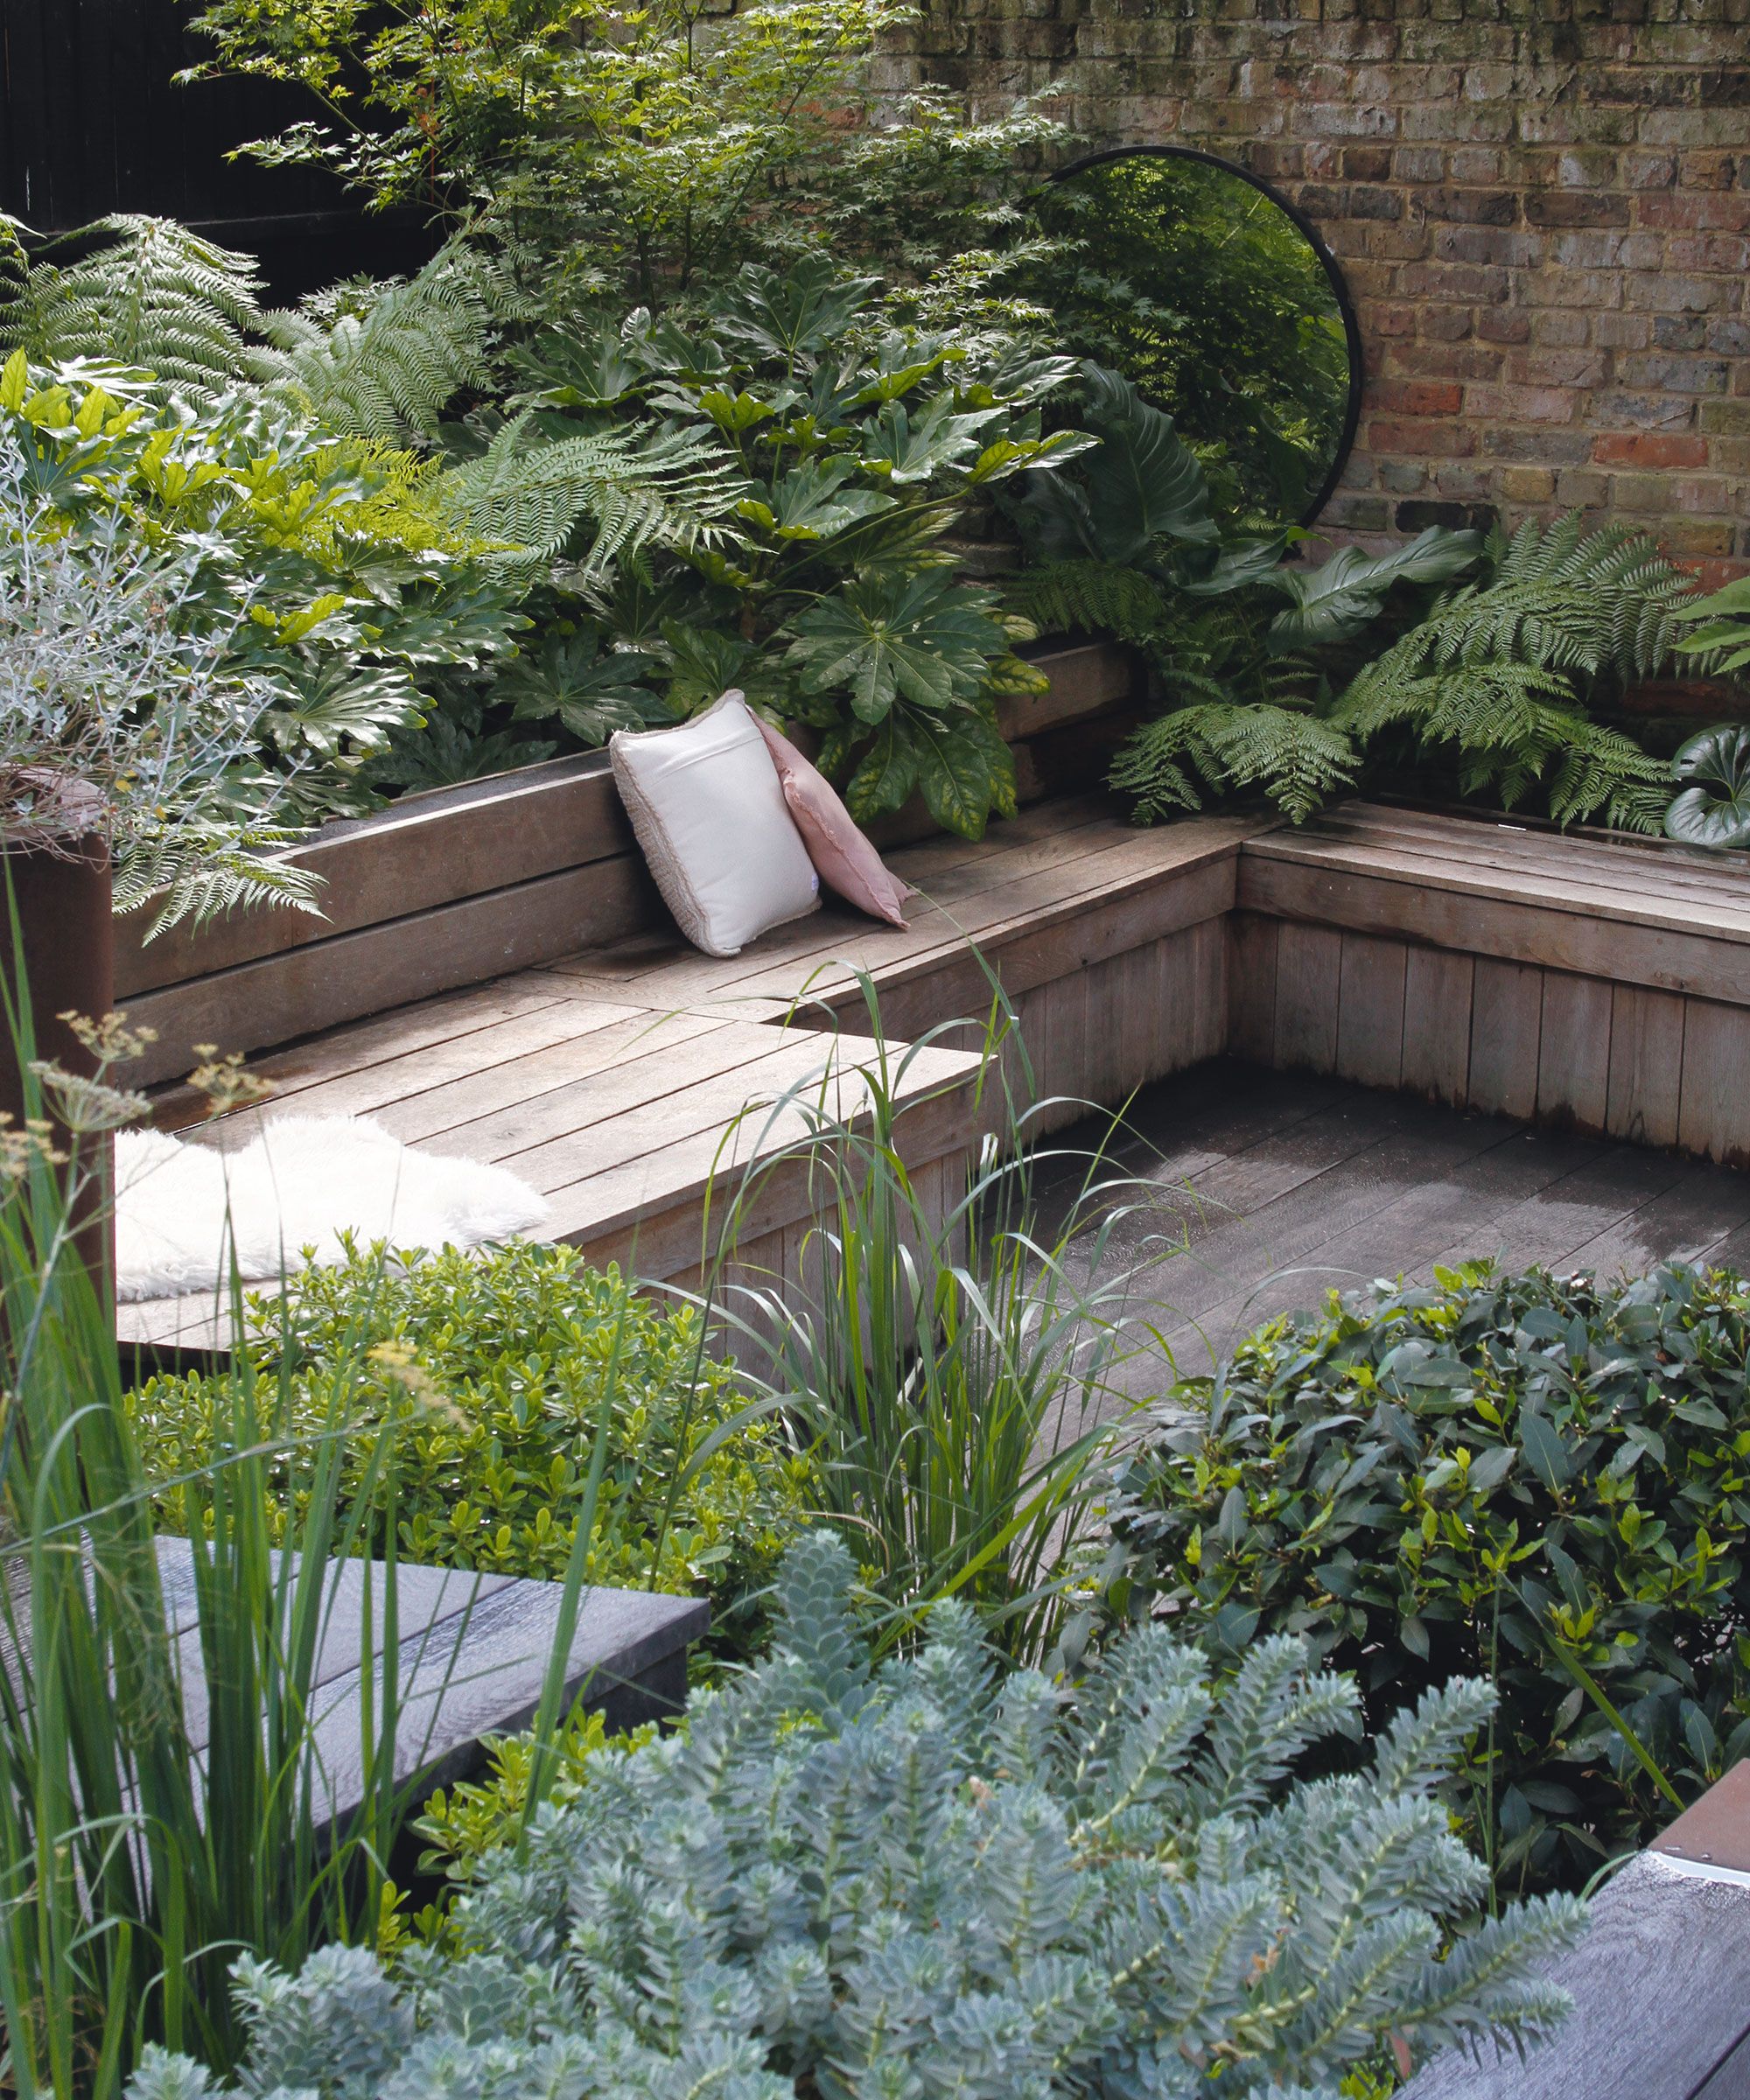 10 Creative Small Garden Ideas to Make the Most of Your Outdoor Space